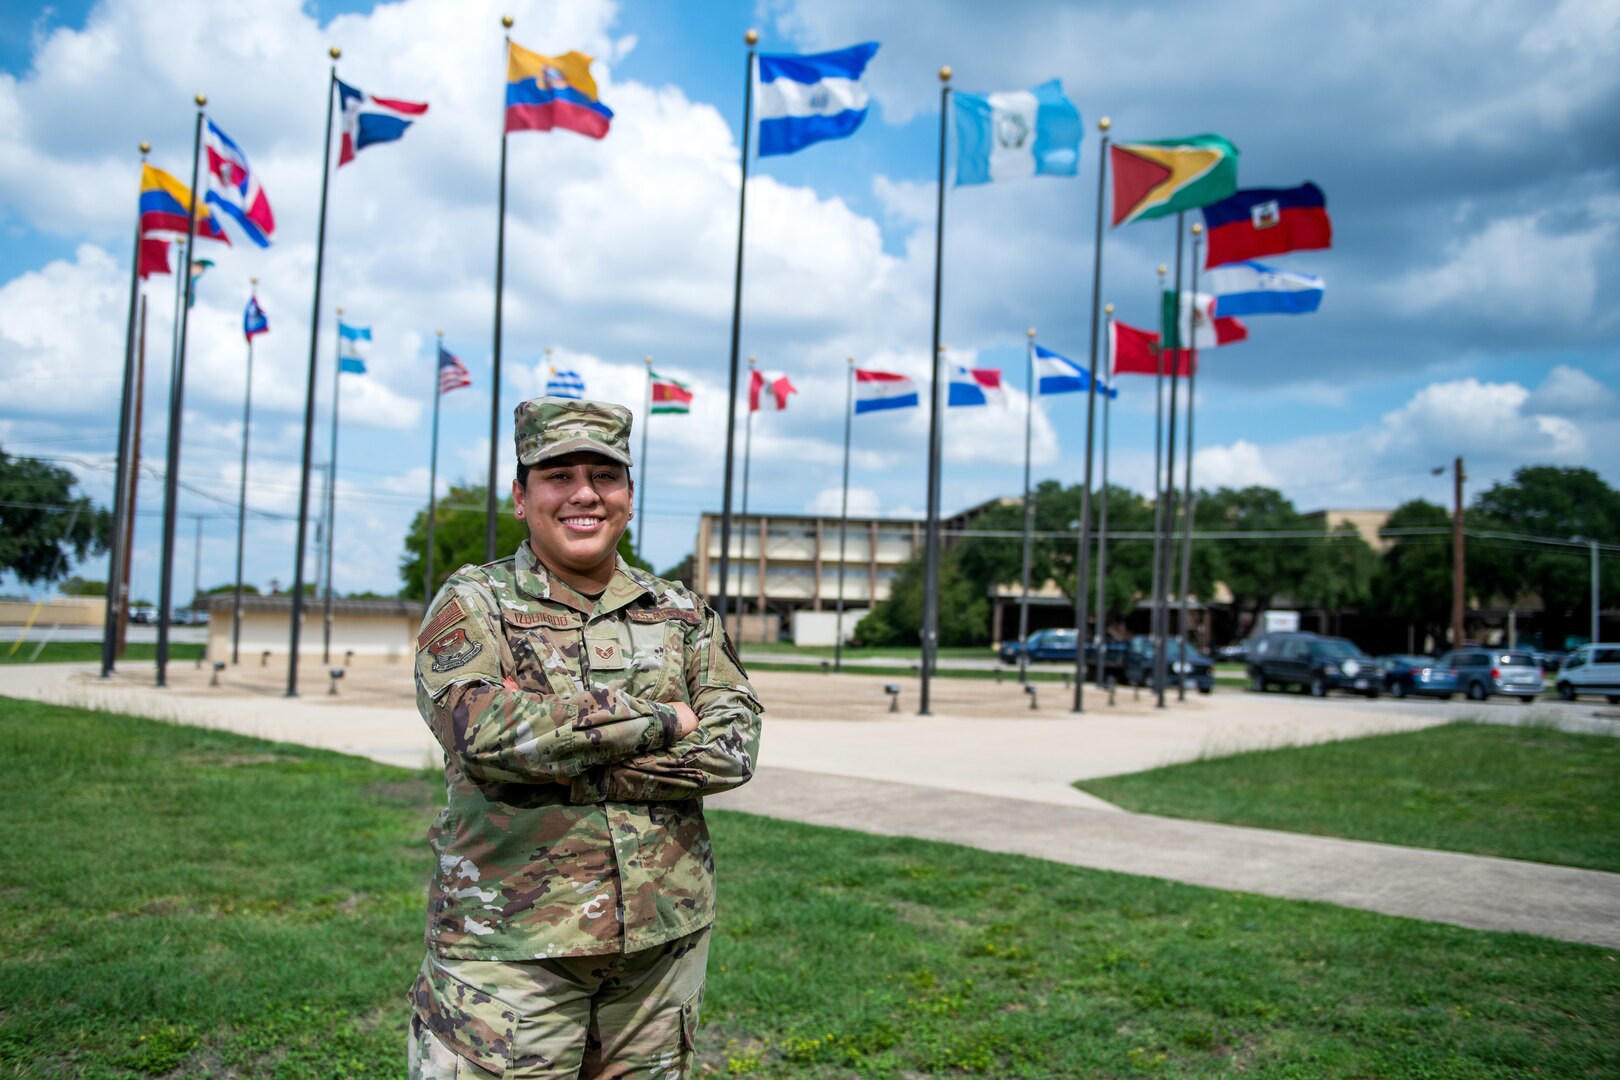 U.S. Air Force Staff Sgt. Soleine Izquierdo, Inter-American Air Forces Academy international student manager, was born in San German, a small town in Lima, Peru.